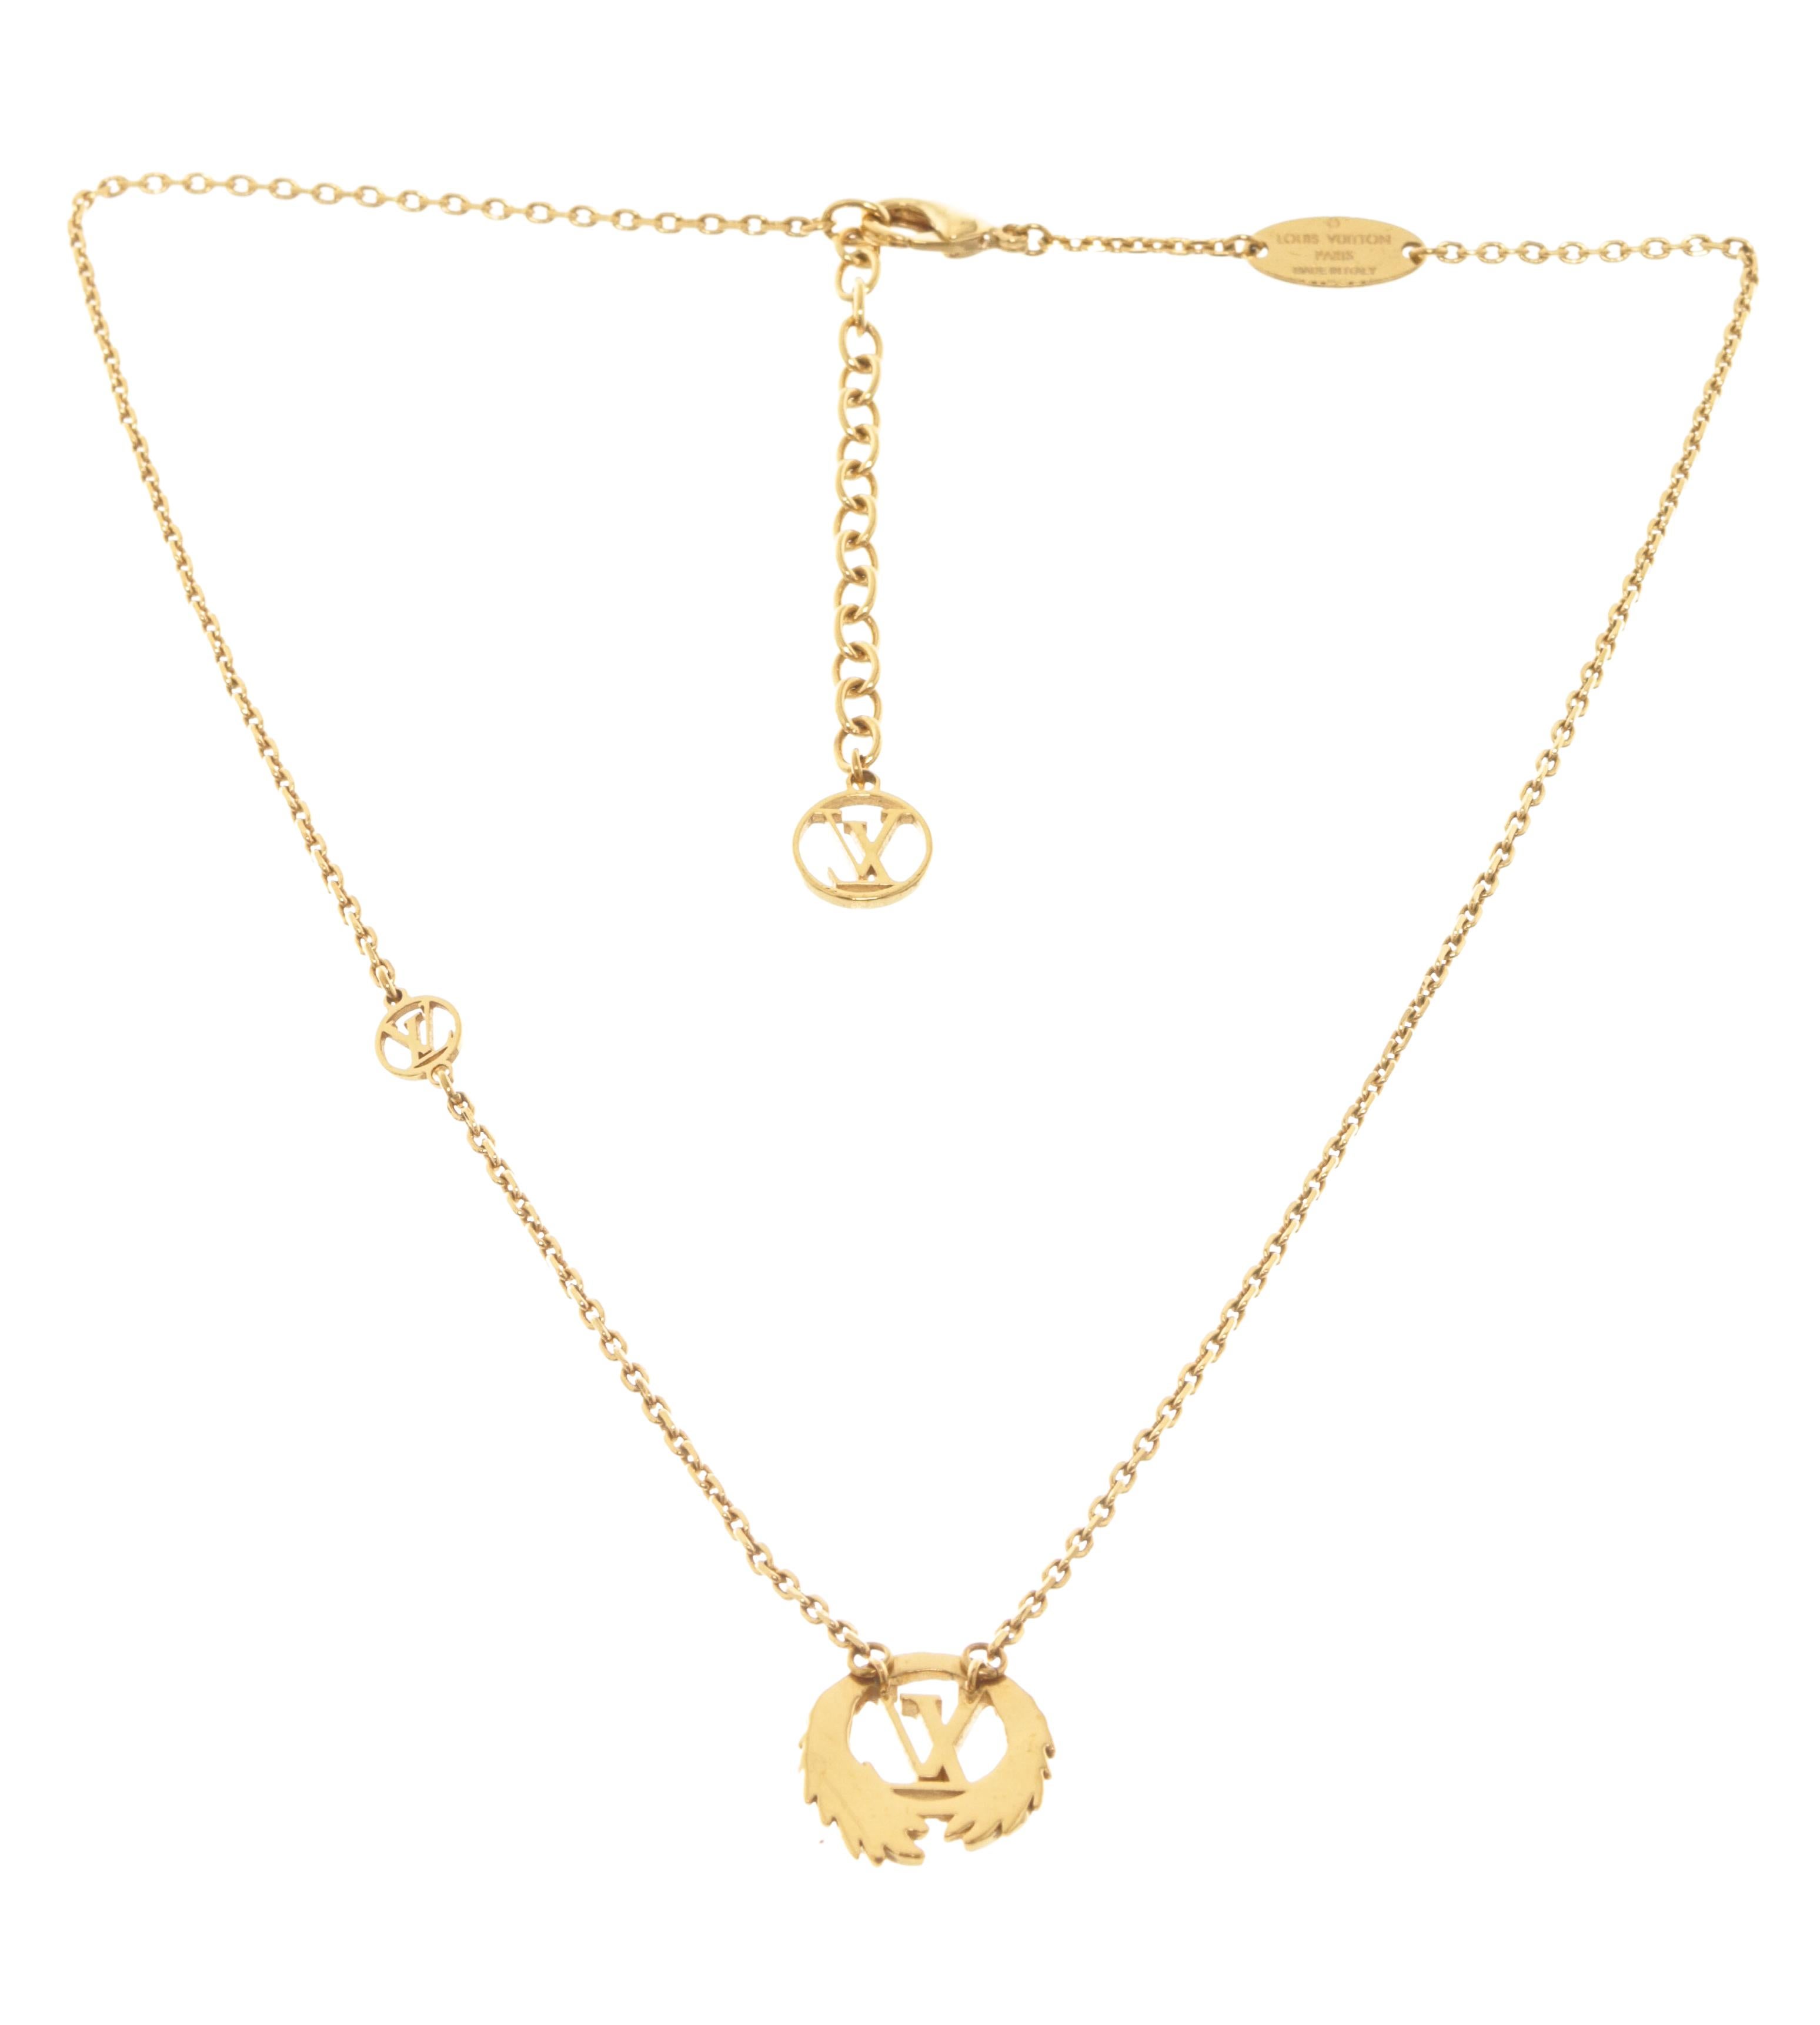 Louis Vuitton Gold-tone Collier LV Angel Pendant Necklace features several signature Louis Vuitton charms   suspended from a cable chain that can be adjusted for a custom fit with lobster clasp closure.

79294MSC